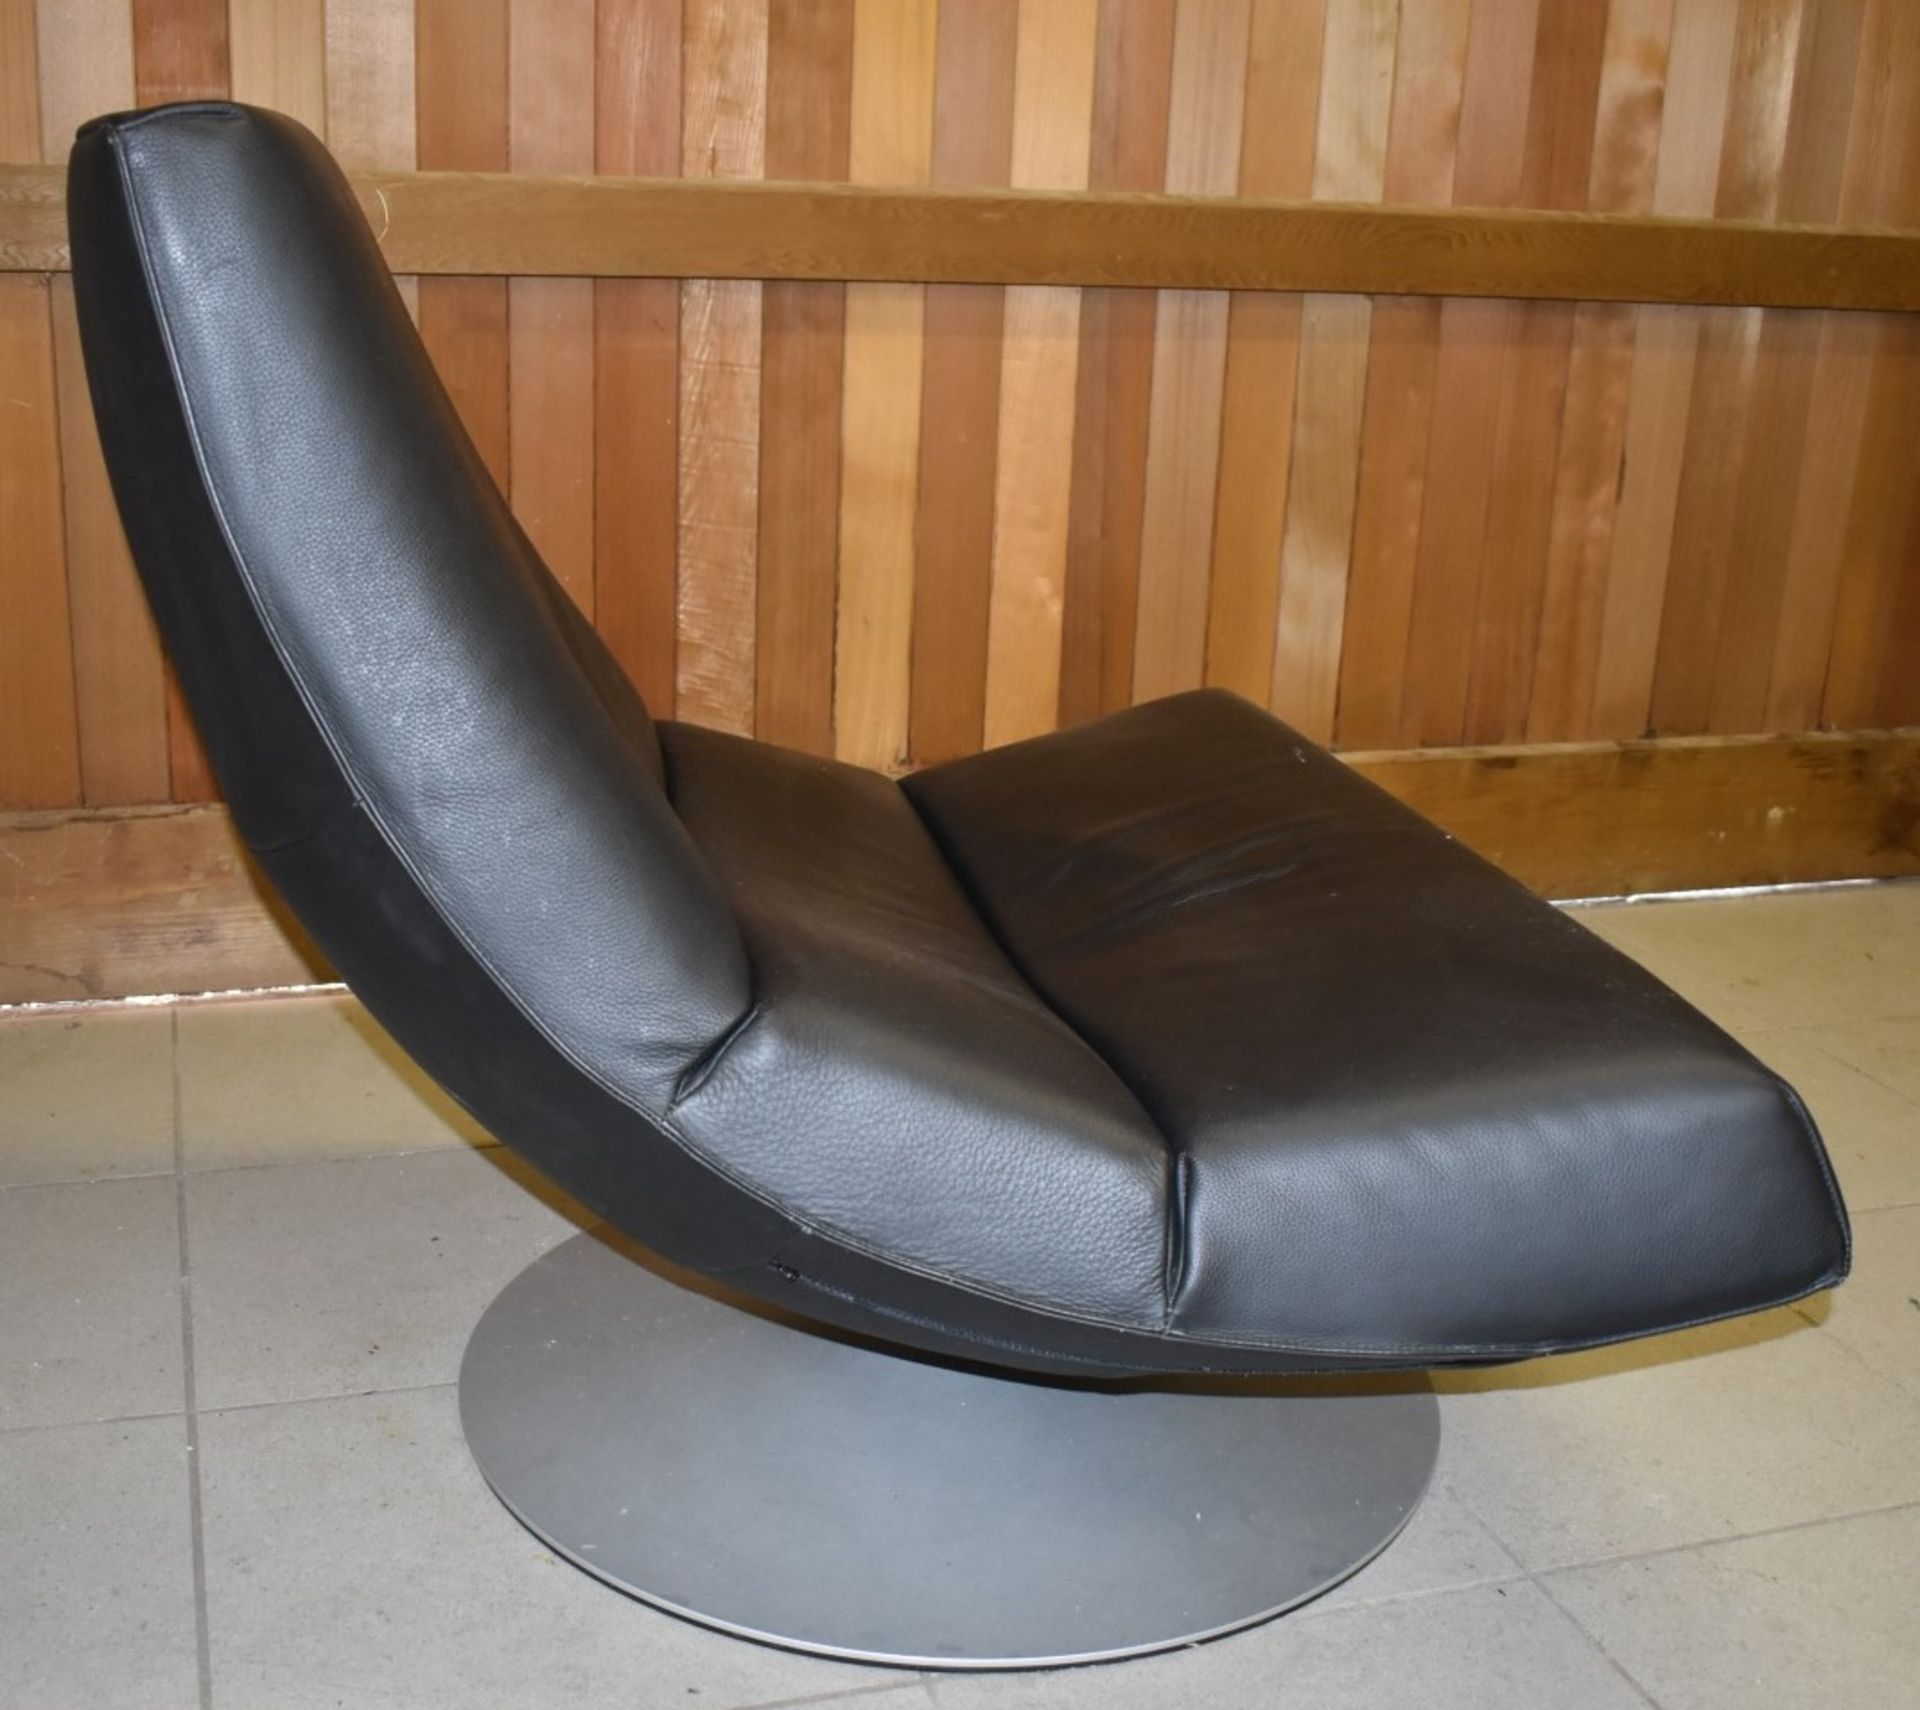 1 x Contemporary Black Leather Swivel Chair With Silver Base - Dimensions: H85/40 x W97 x D100 cms - - Image 2 of 3